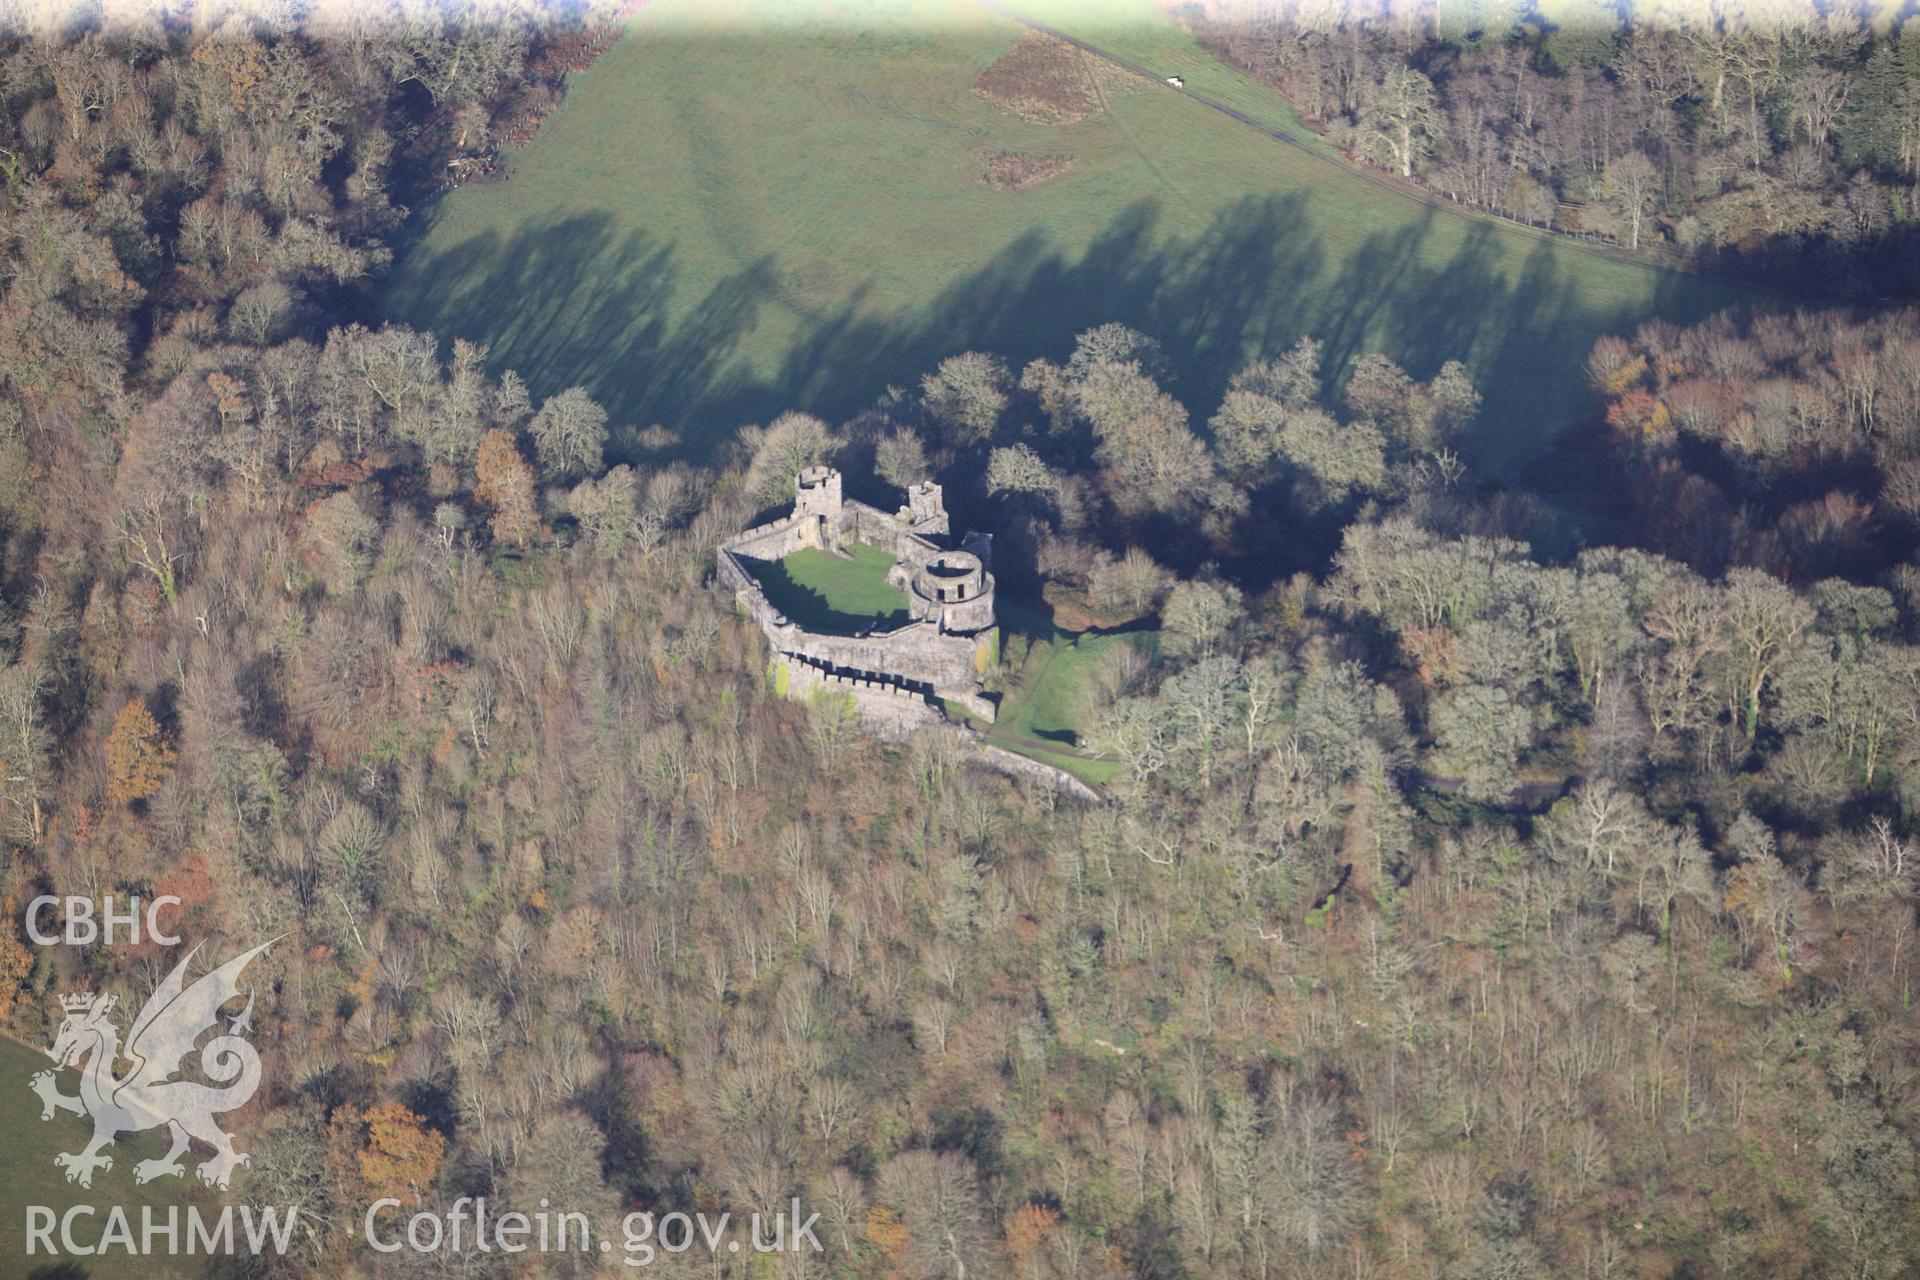 RCAHMW colour oblique photograph of Dinefwr Castle, winter view from south-east. Taken by Toby Driver on 23/11/2012.